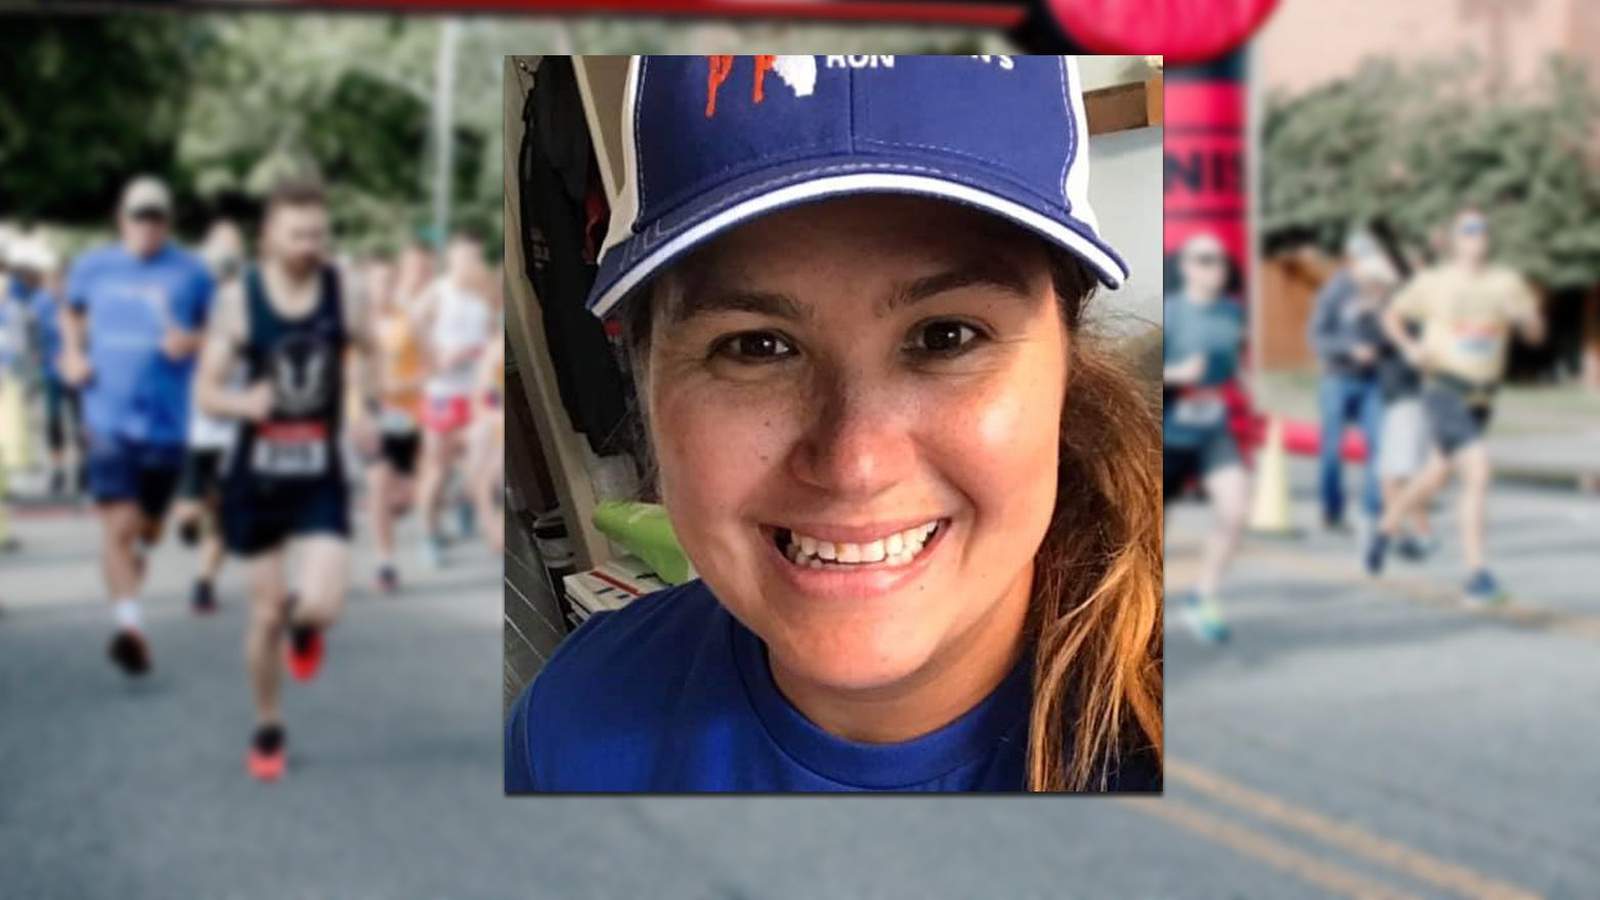 Local mom helps create run to benefit those living with Parkinson’s